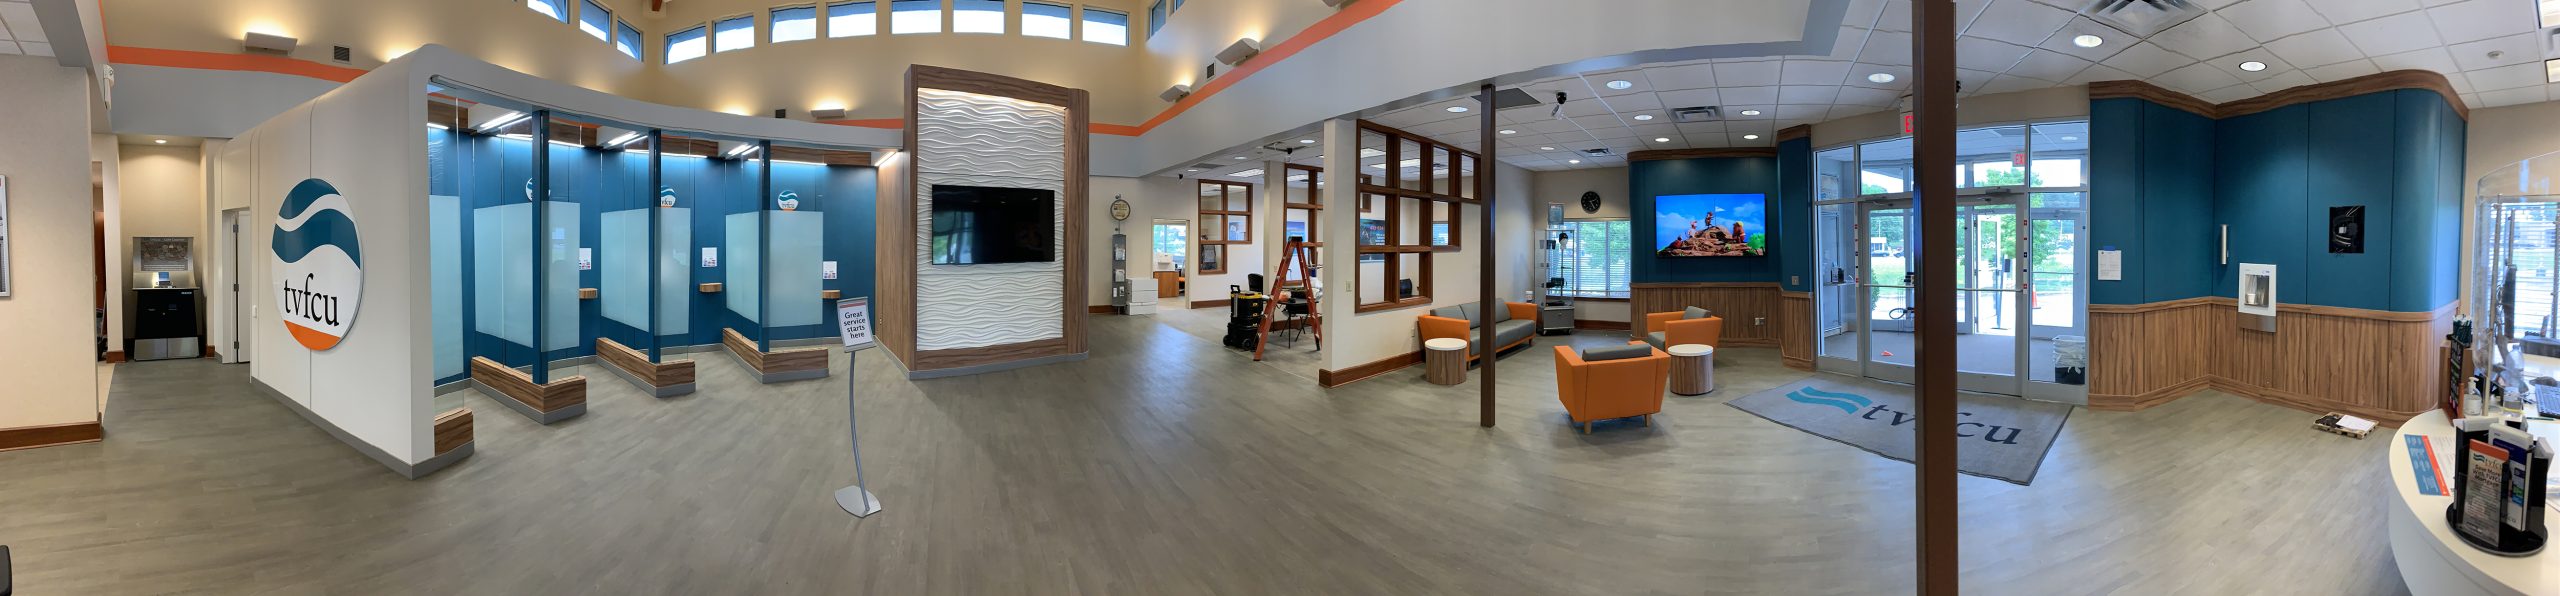 Tennessee Valley Federal Credit Union Branch Remodel Project After